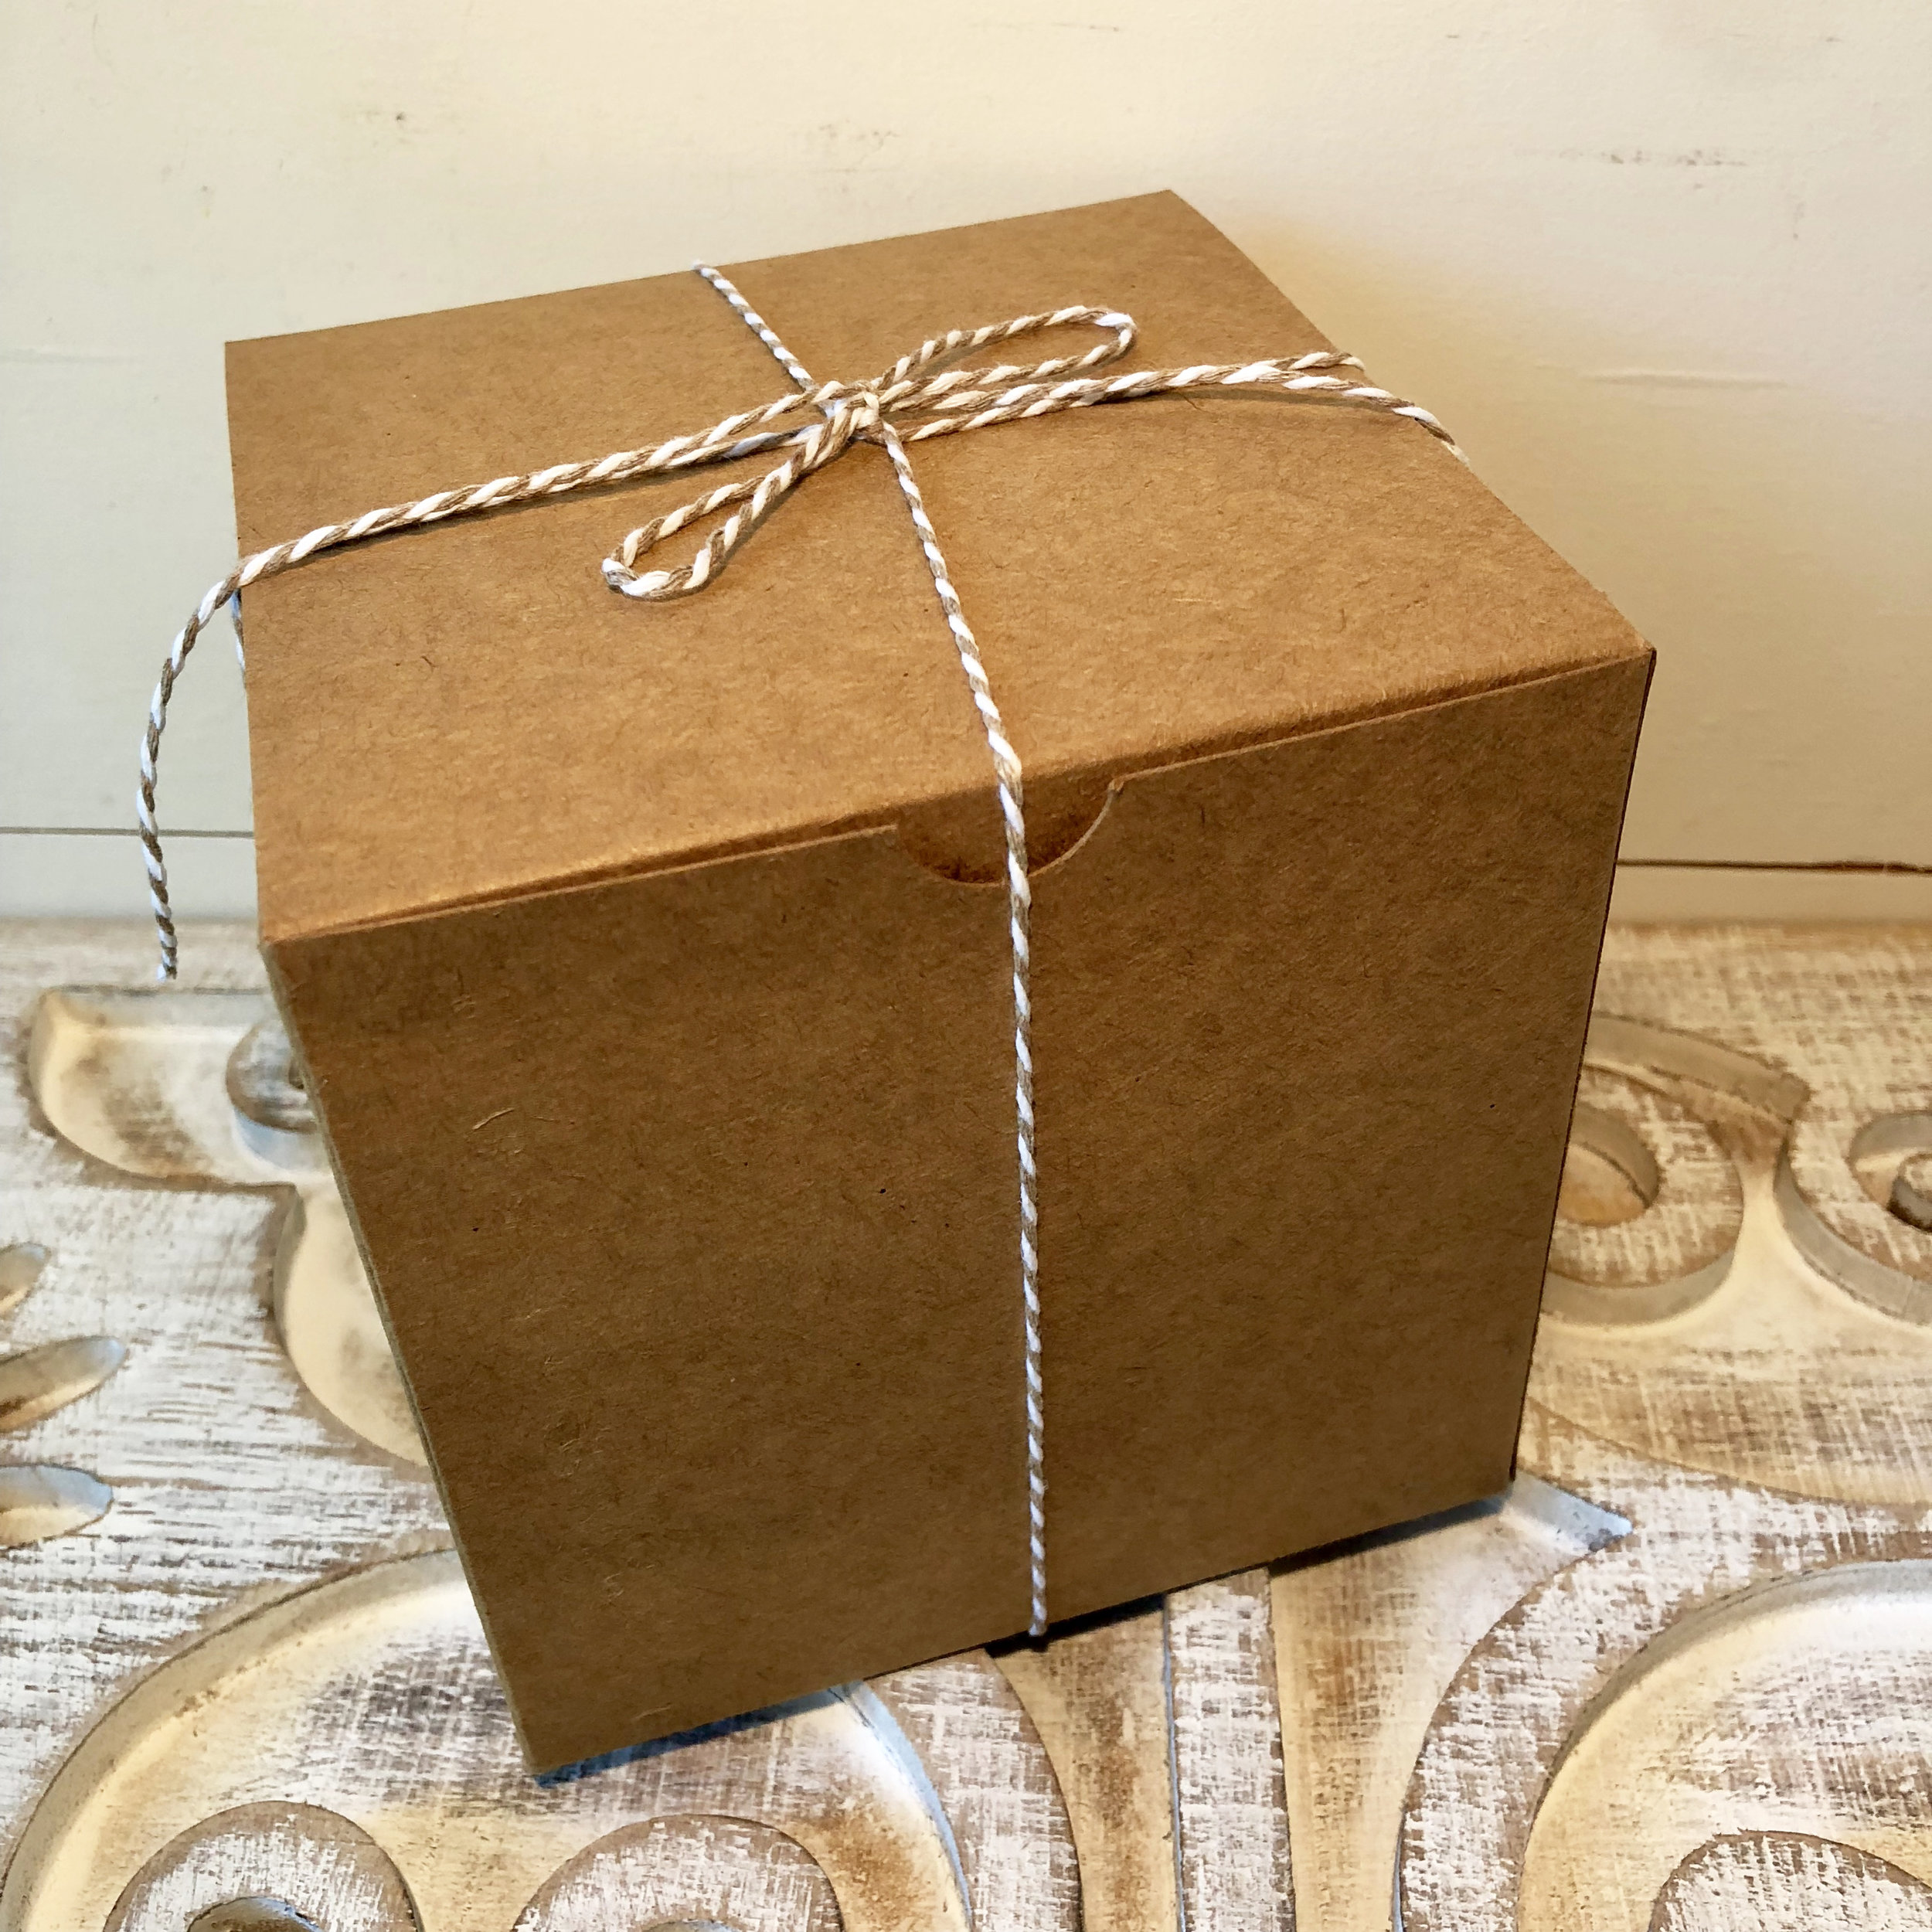 BEE GIFT BOX - parents to bee — Rustic Zebra Boutique